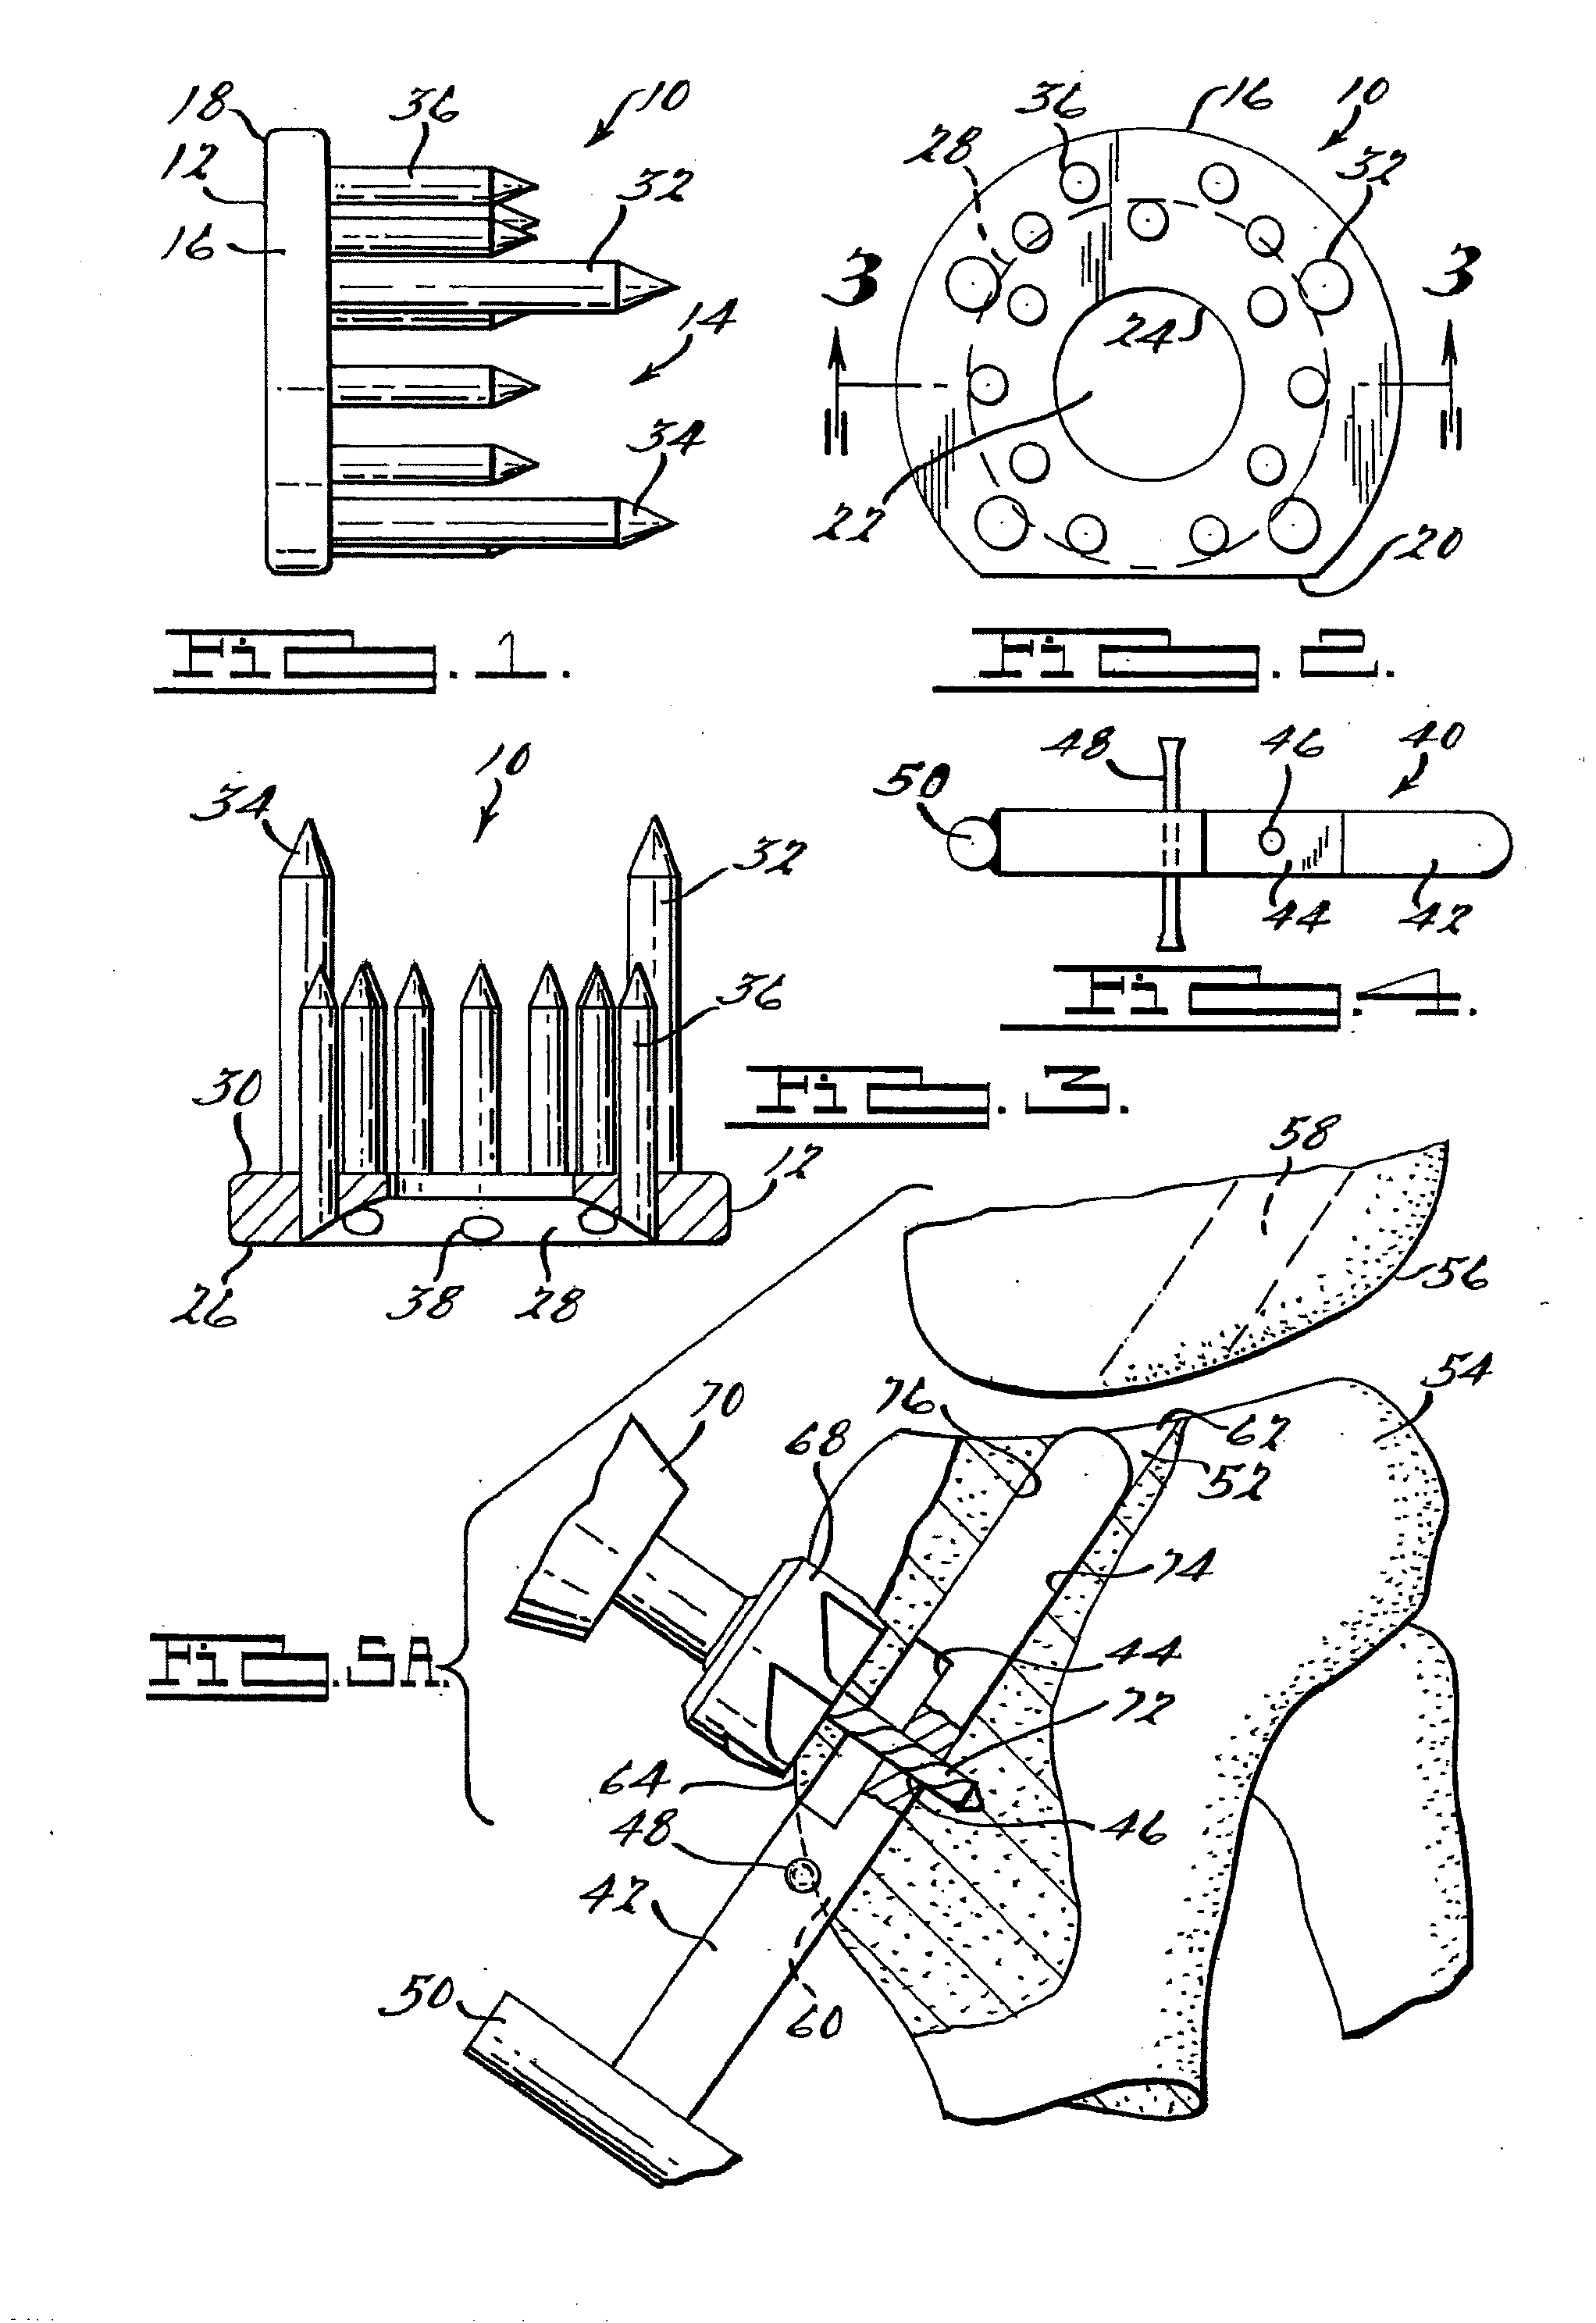 Apparatus and Method for Tibial Fixation of Soft Tissue